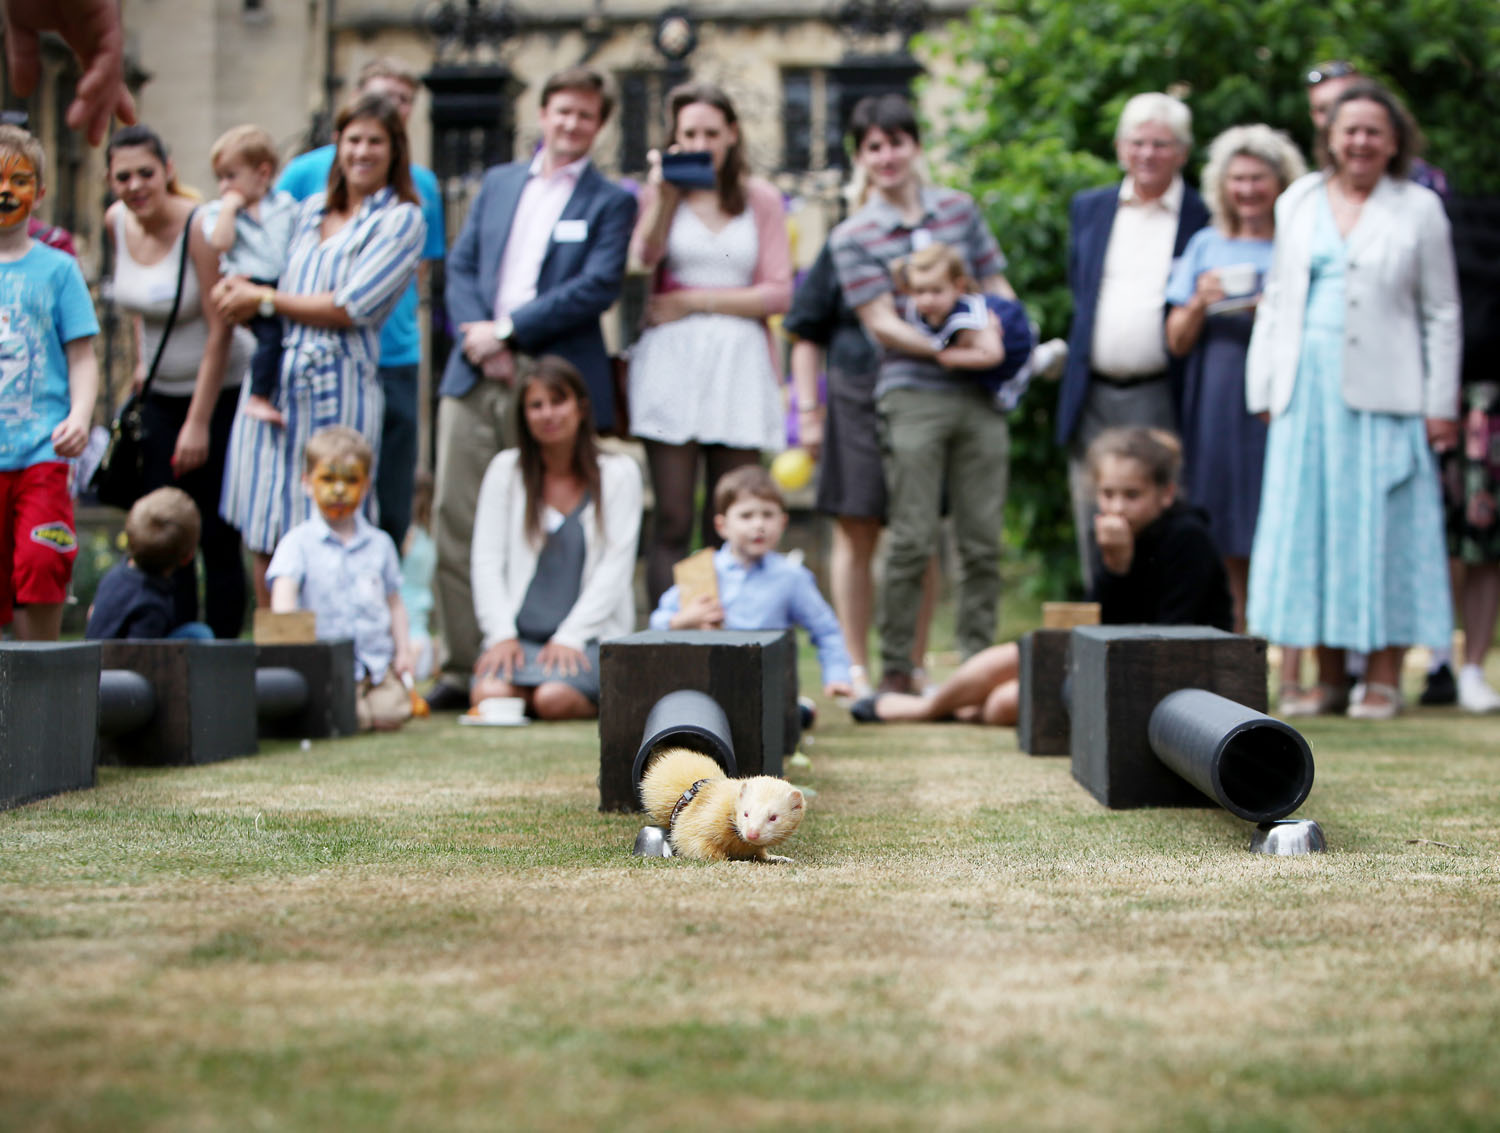  Photography of Merton College and the Merton College/Society 2017 Family Fayre, held at Merton College Oxford on the 25th June 2017. 